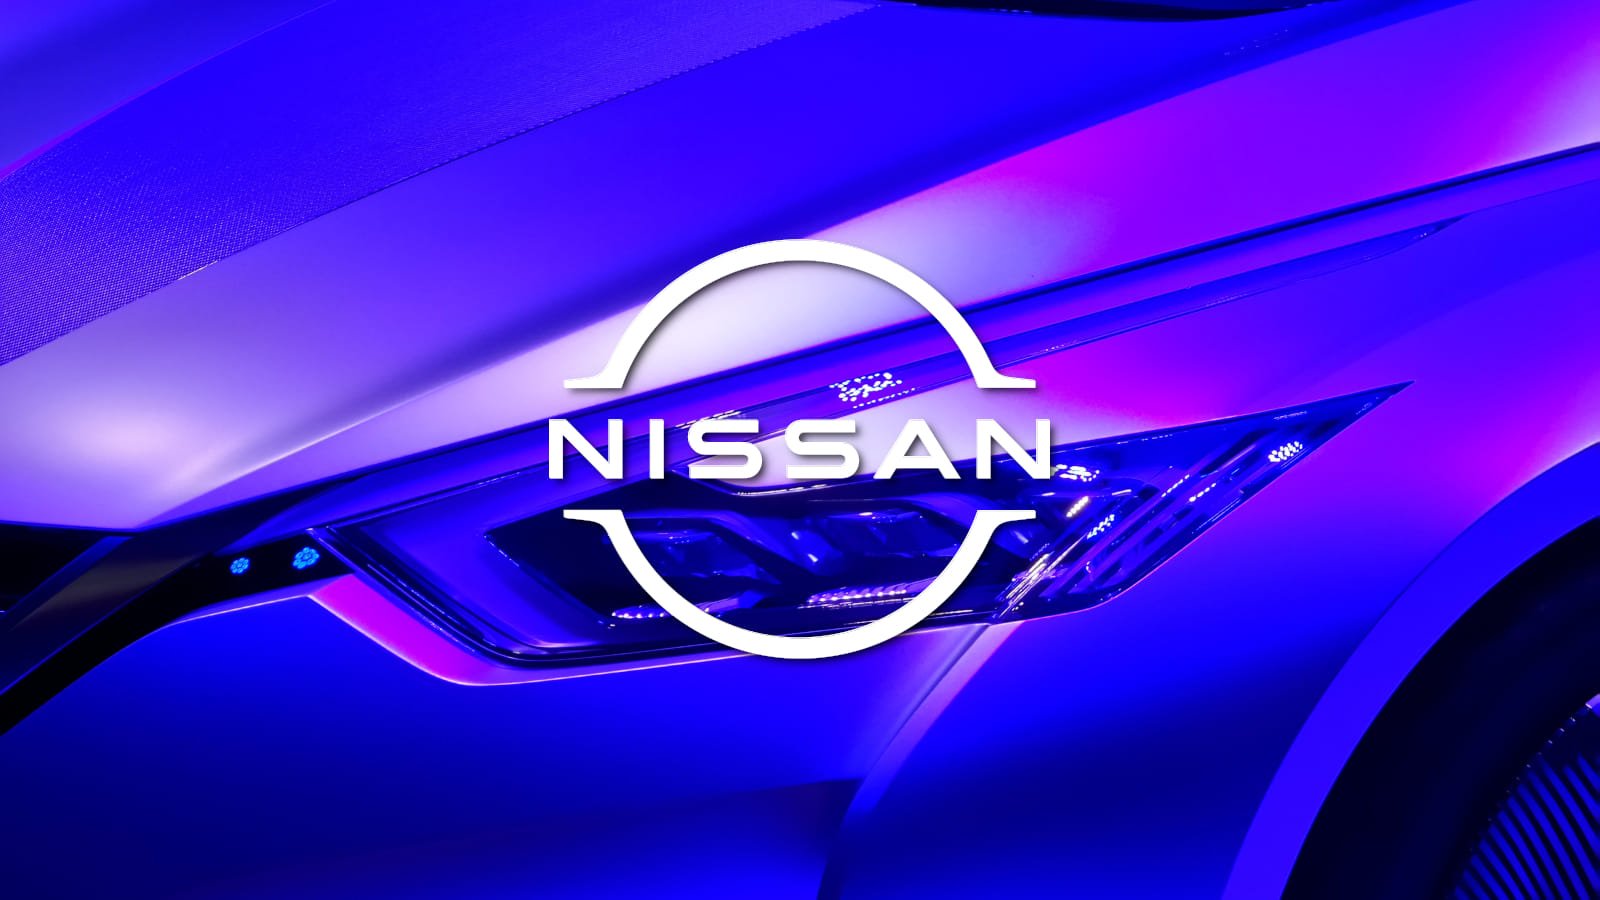 Nissan is investigating cyberattack and potential data breach